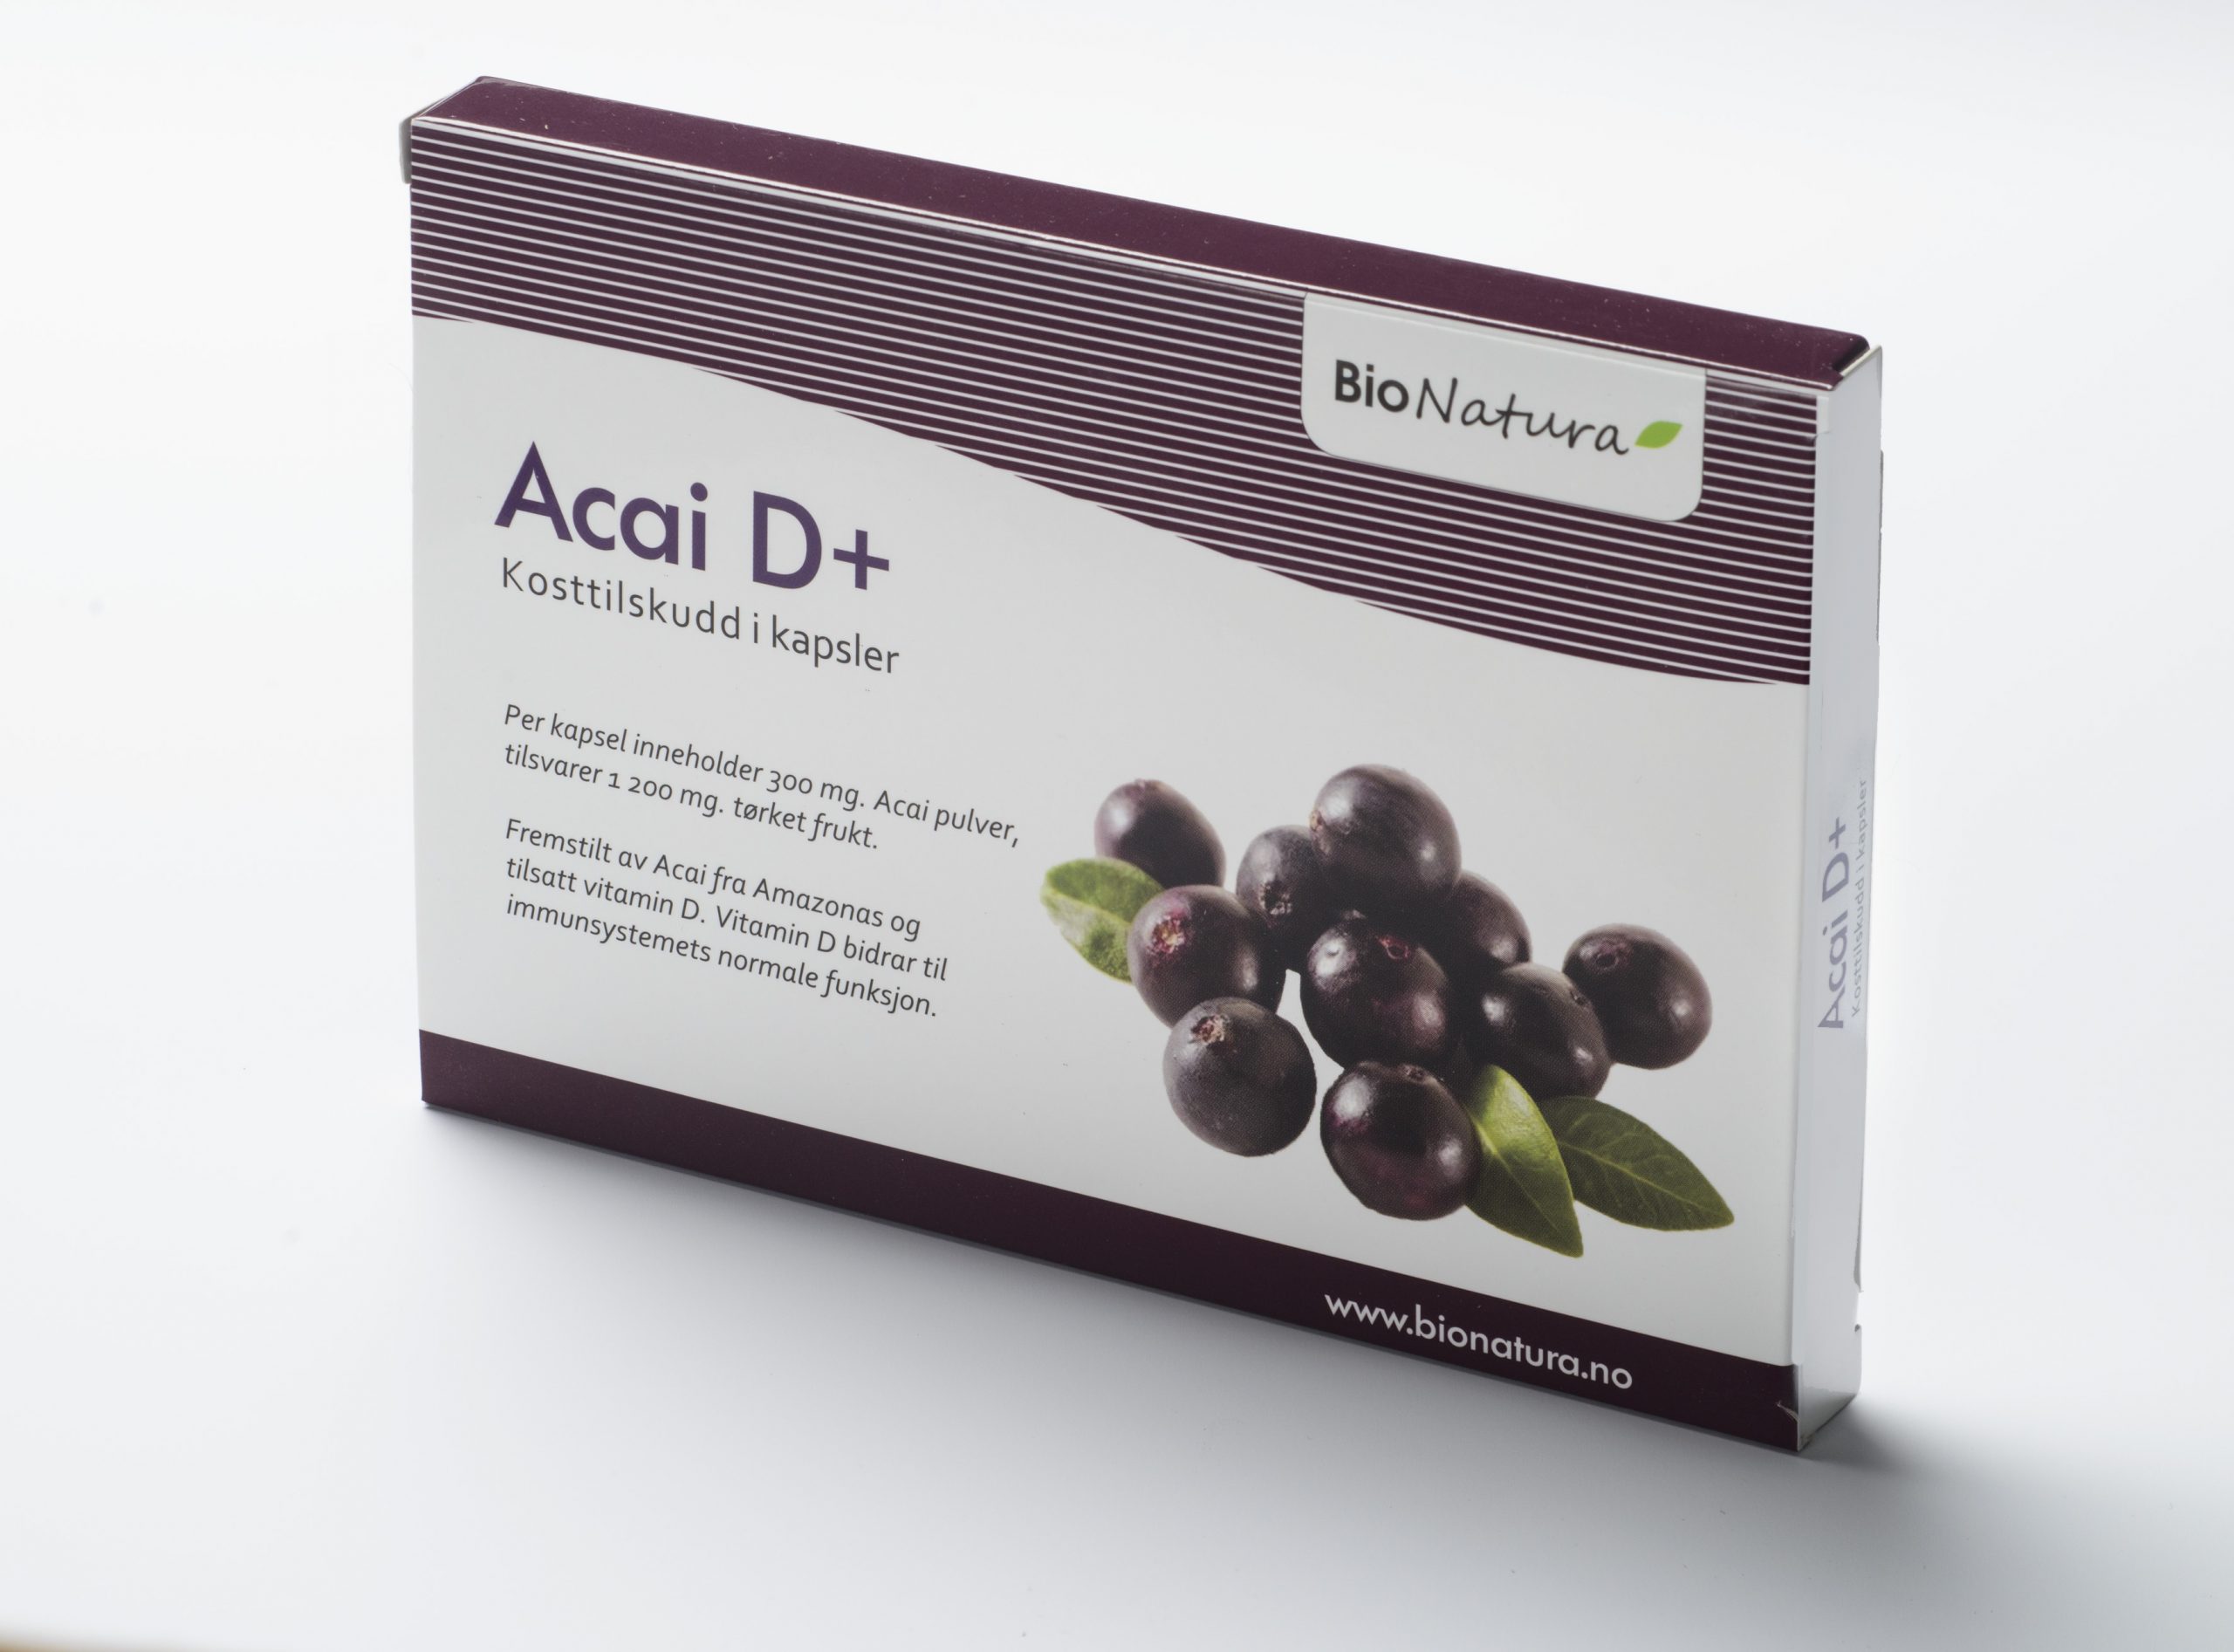 Featured image for “Acai D+”